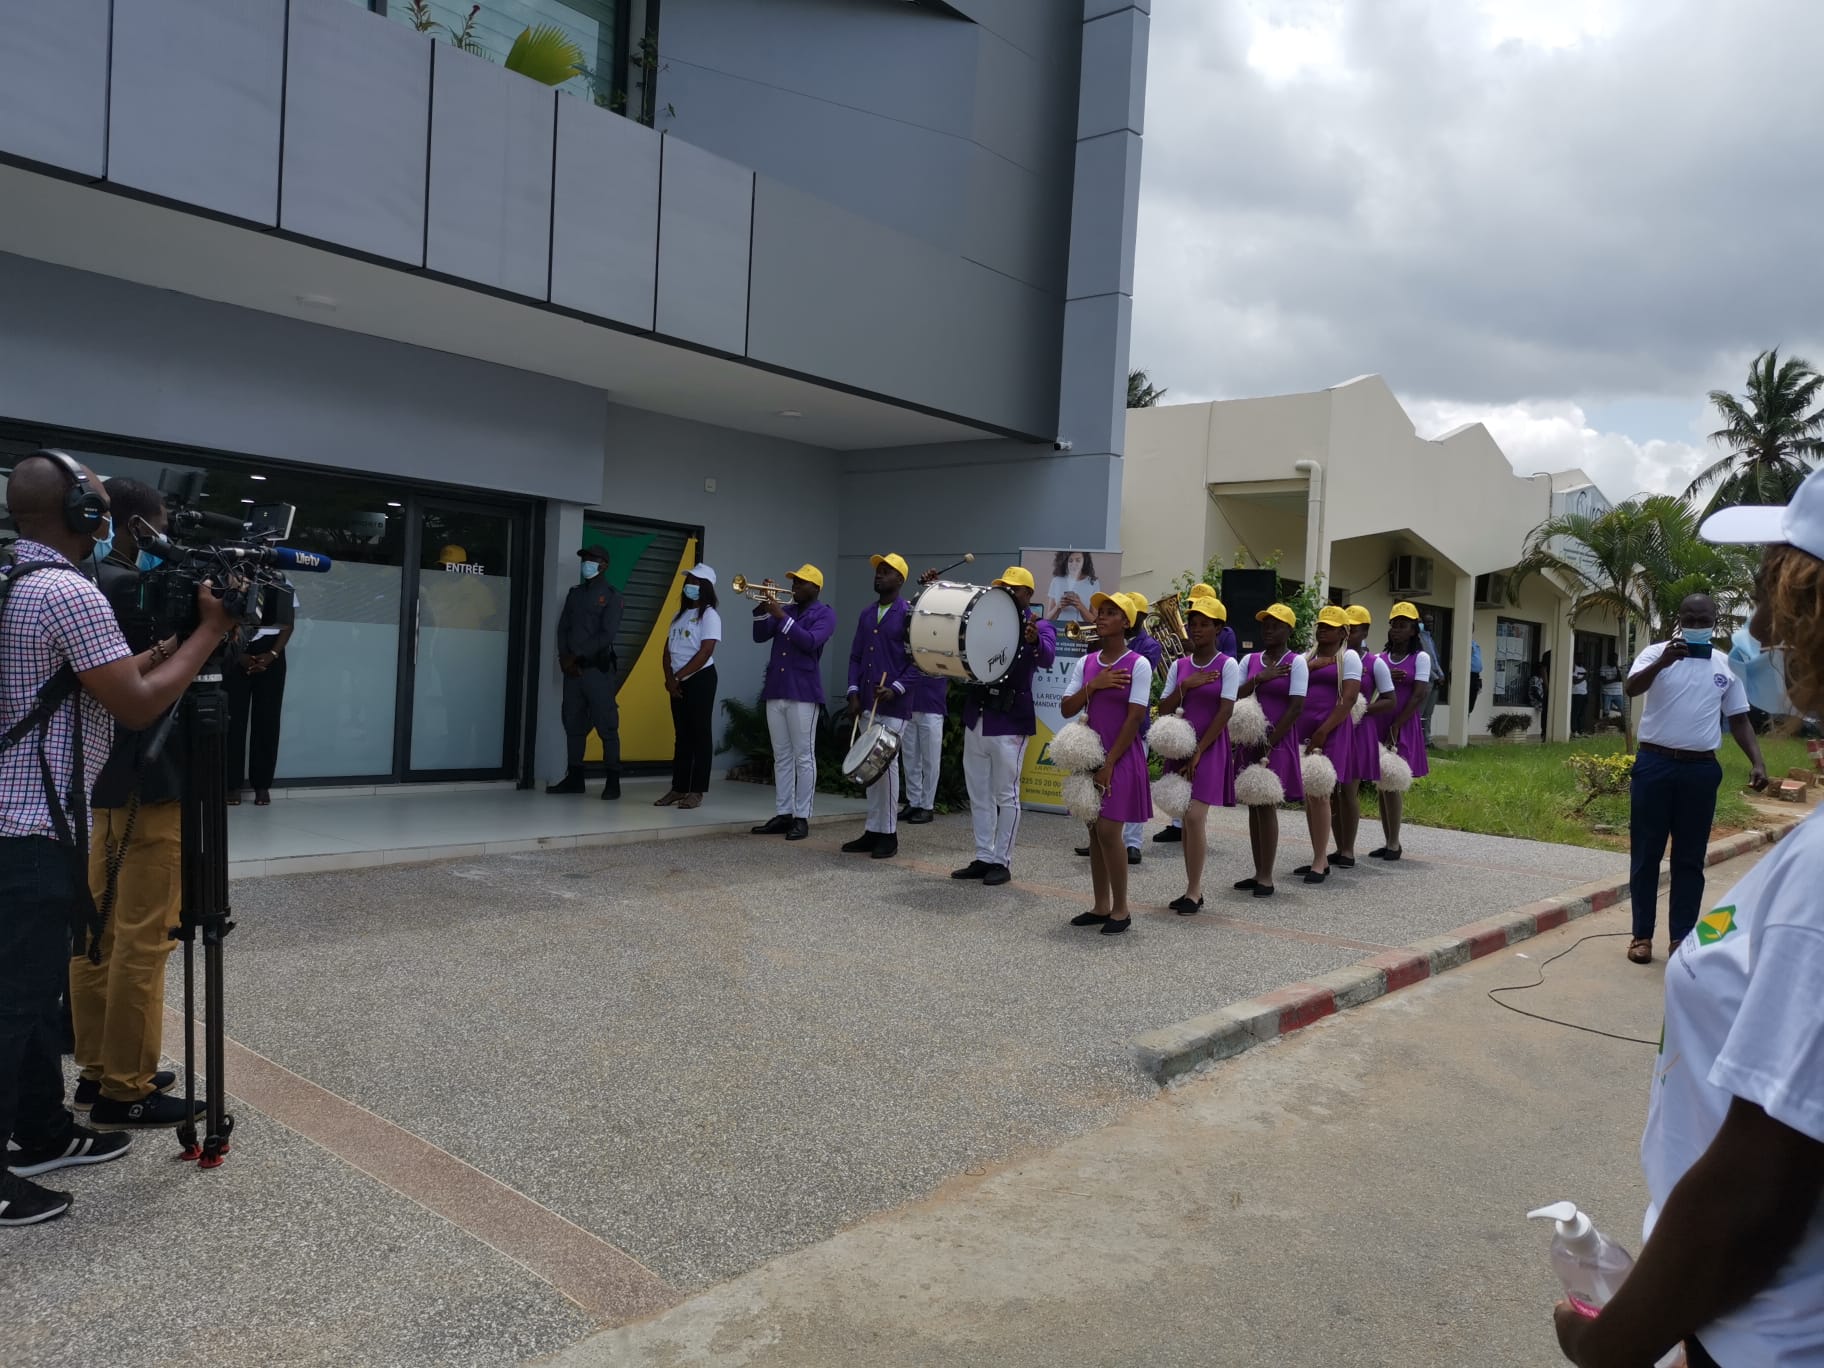 UPU and Cote d’Ivoire showcase post office future